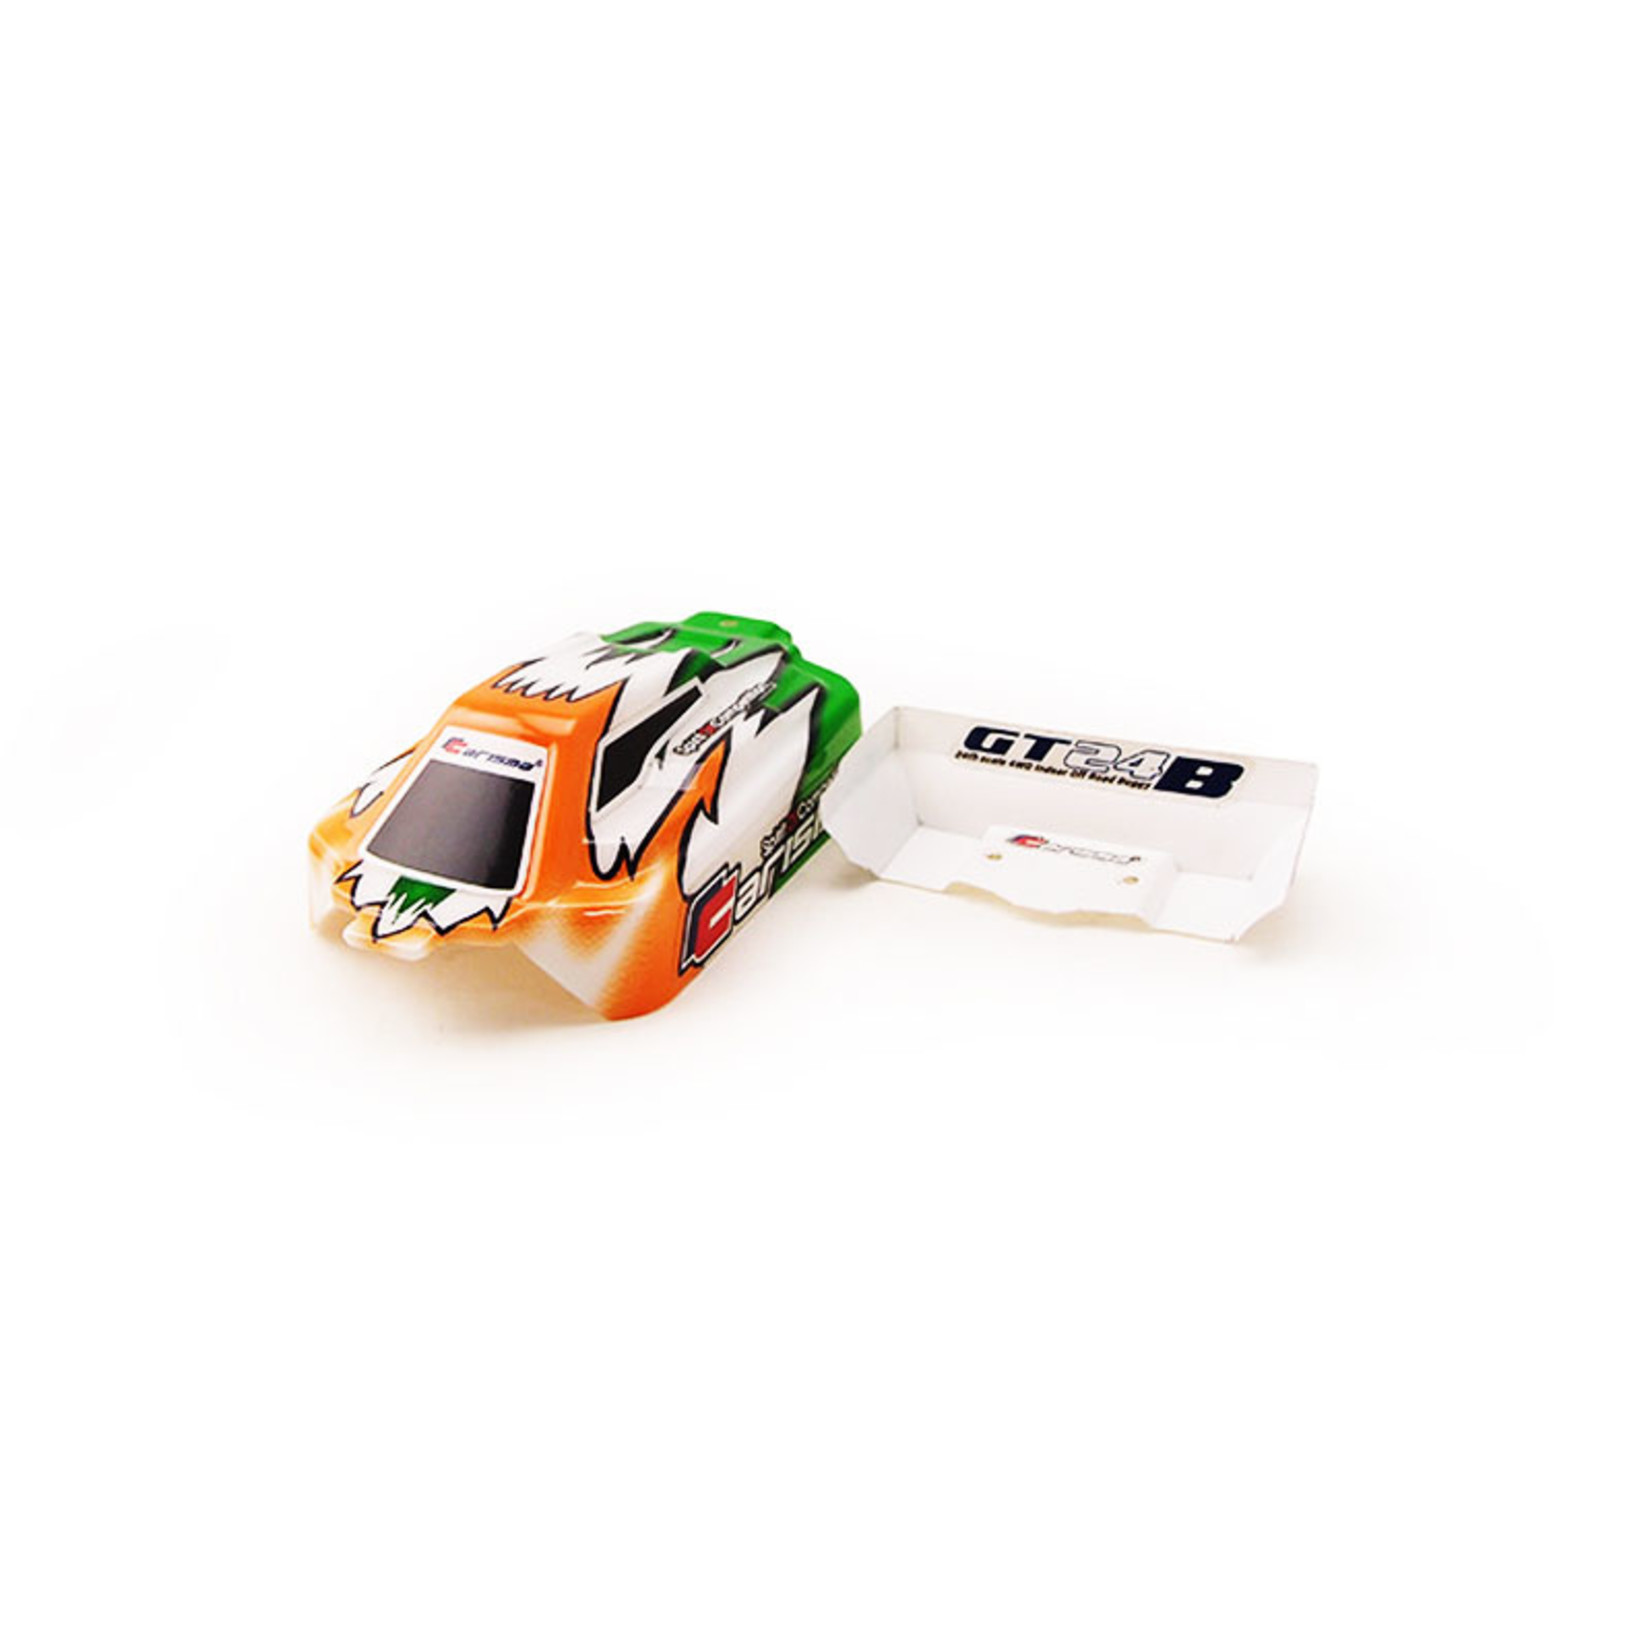 CARISMA GT24B Painted and Decorated Buggy Body; Orange / Green